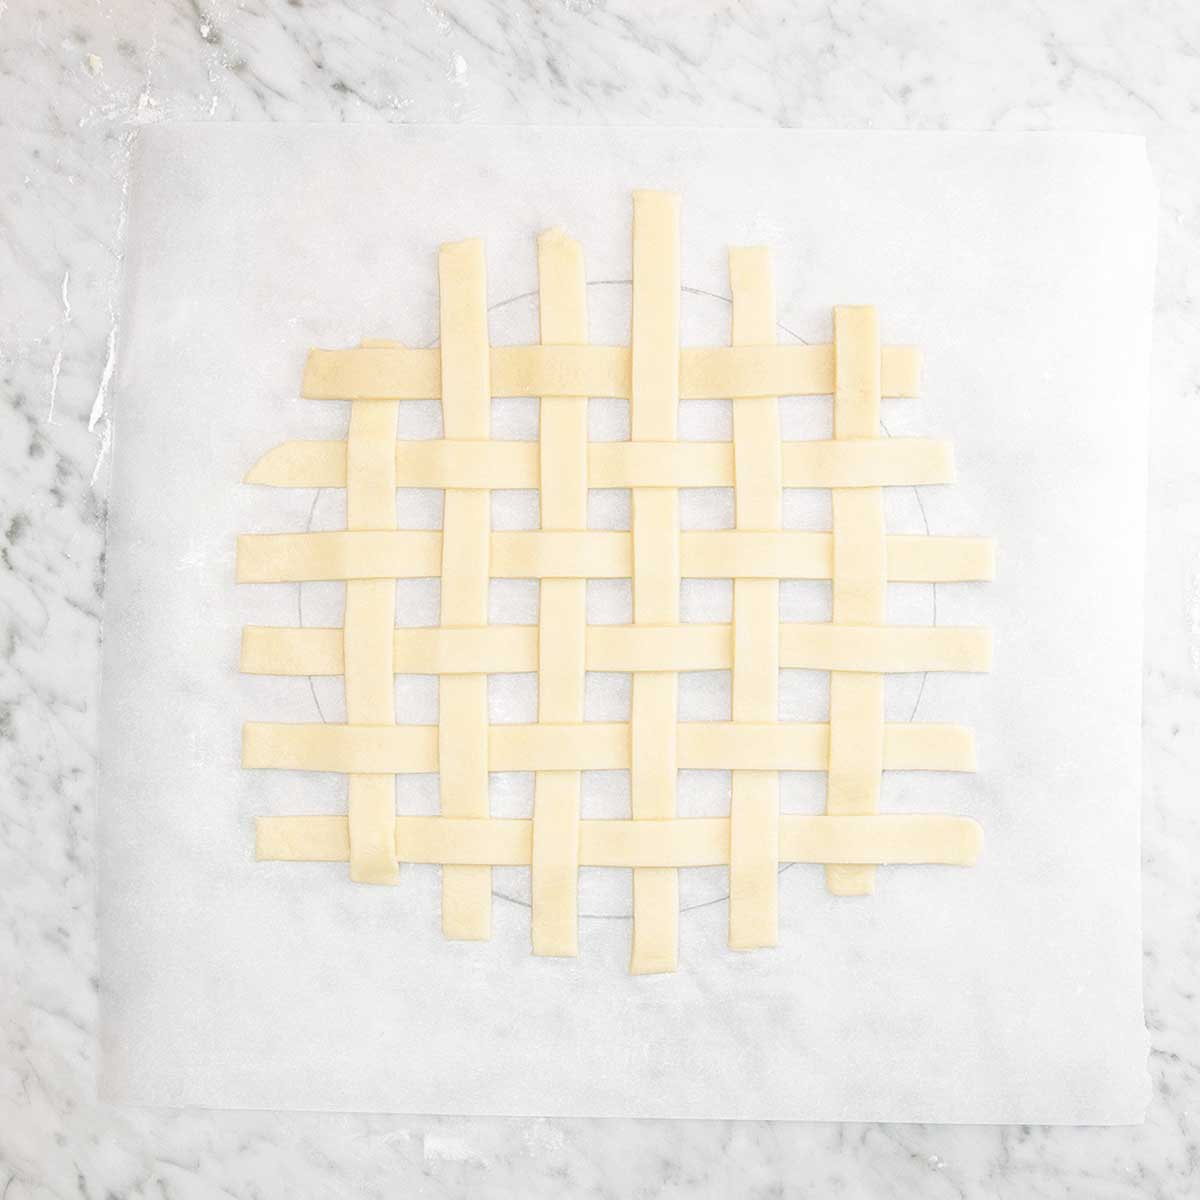 Strips of dough being arranged into a lattice pie crust.